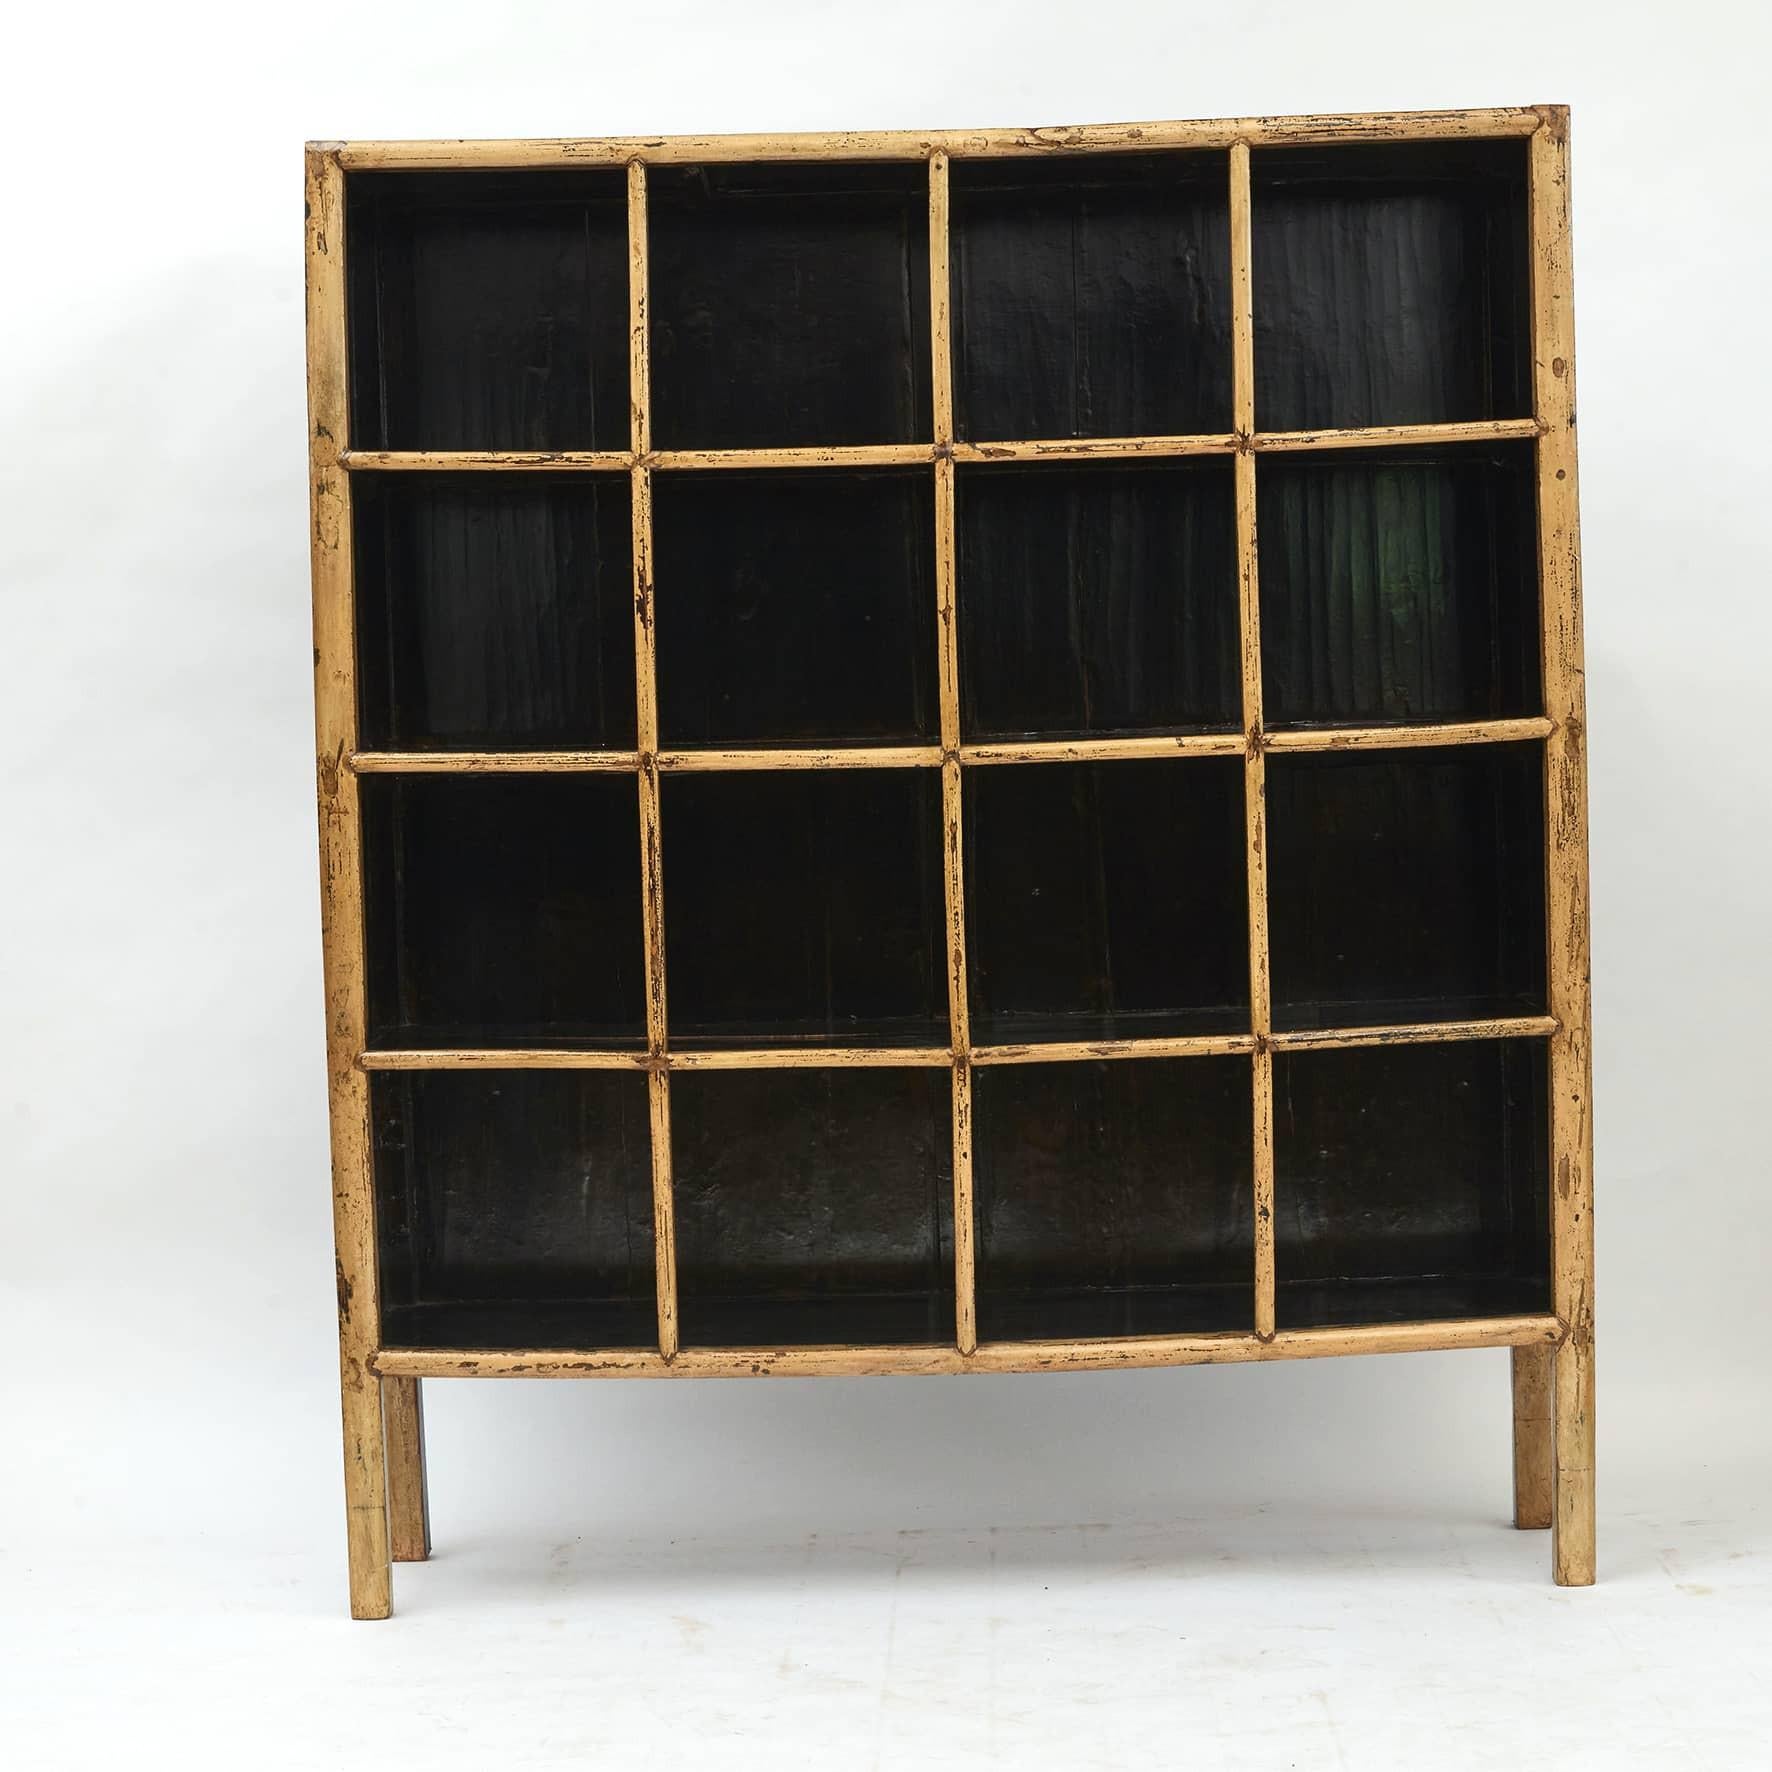 Bookcase made from solid elmwood and covered in a light yellow lacquer on the outside and black lacquer on the inside.
Natural age-related patina and charisma.
China 1880-1900.
 